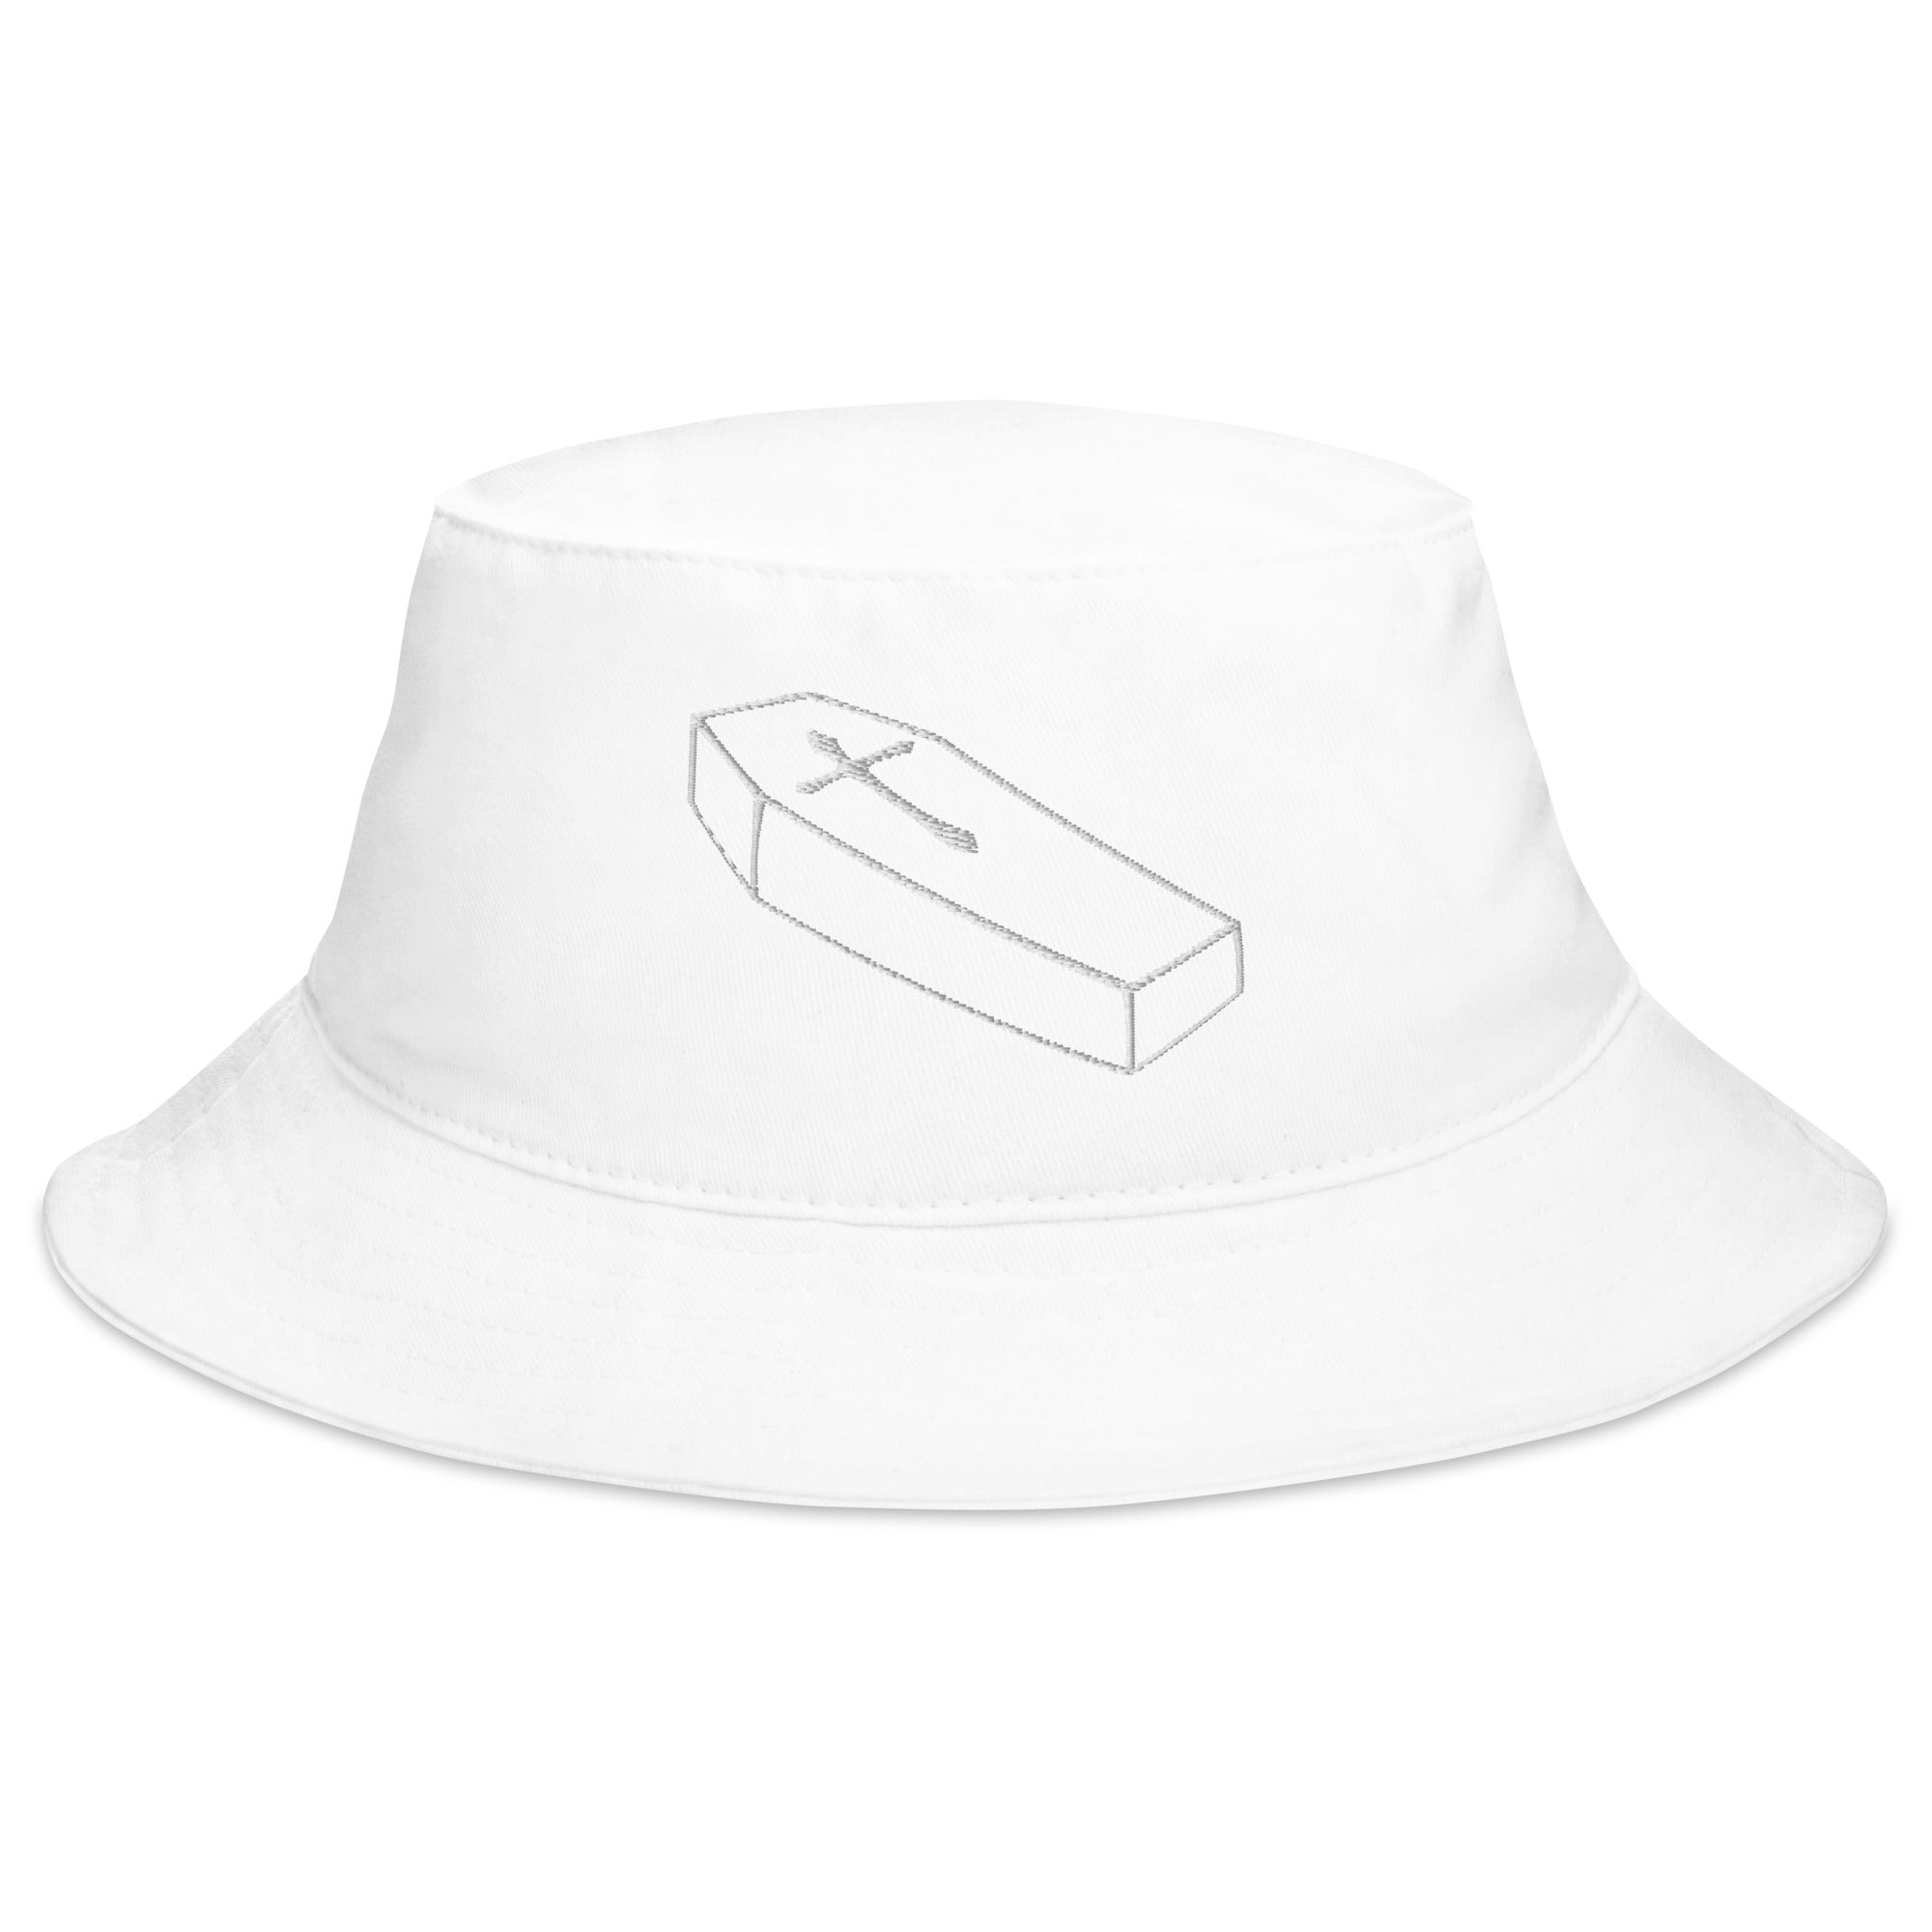 Toe Pincher Coffin with Cross Embroidered Bucket Hat